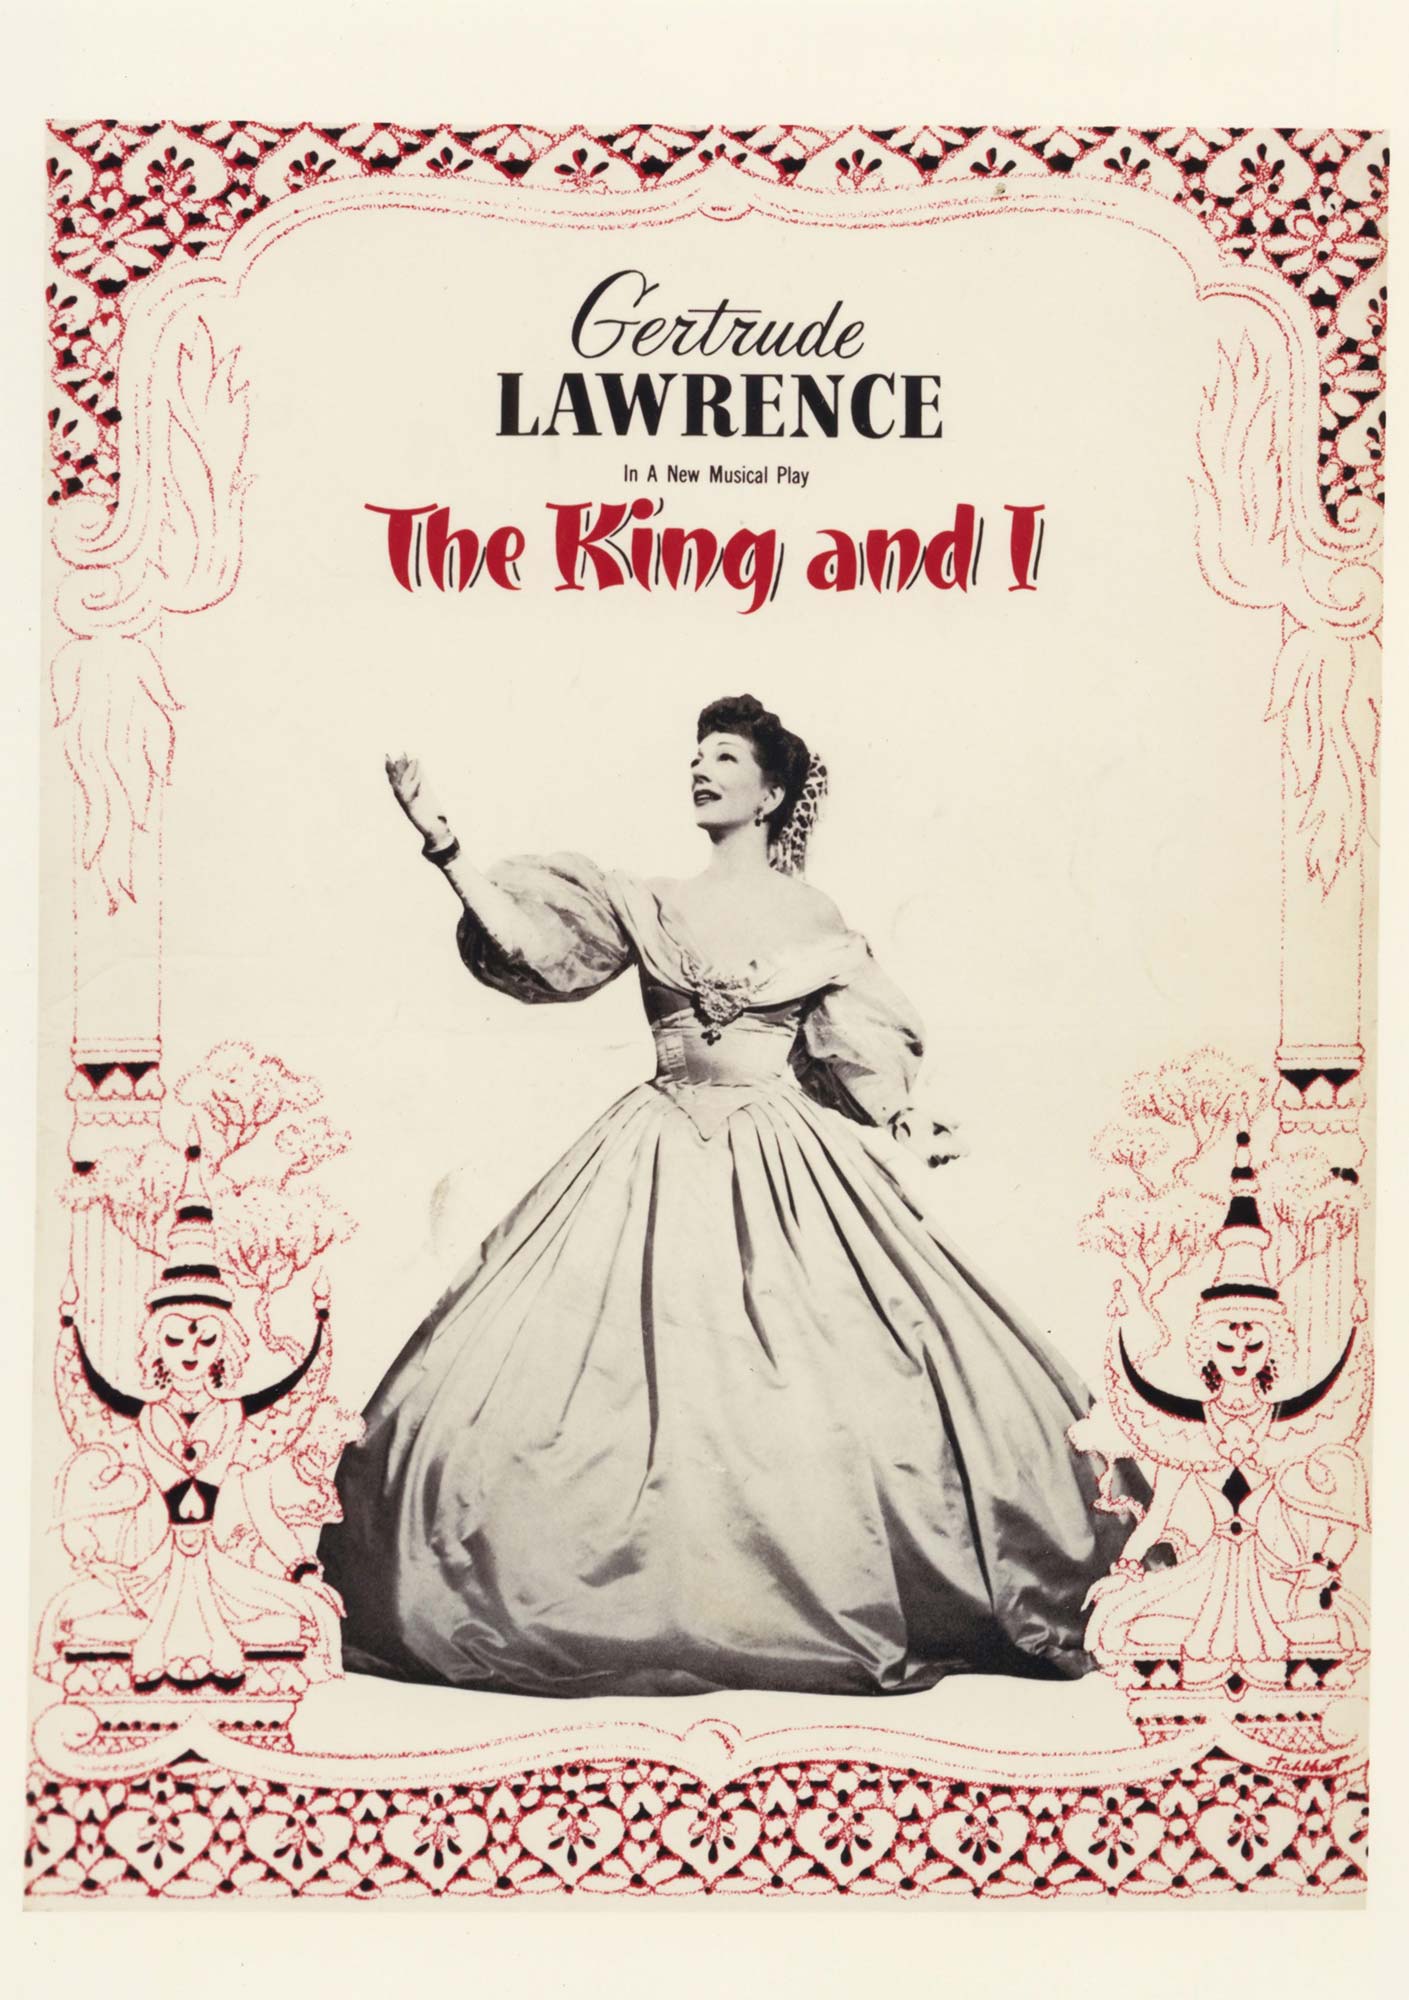 A poster for the 1951 Broadway production of The King and I.